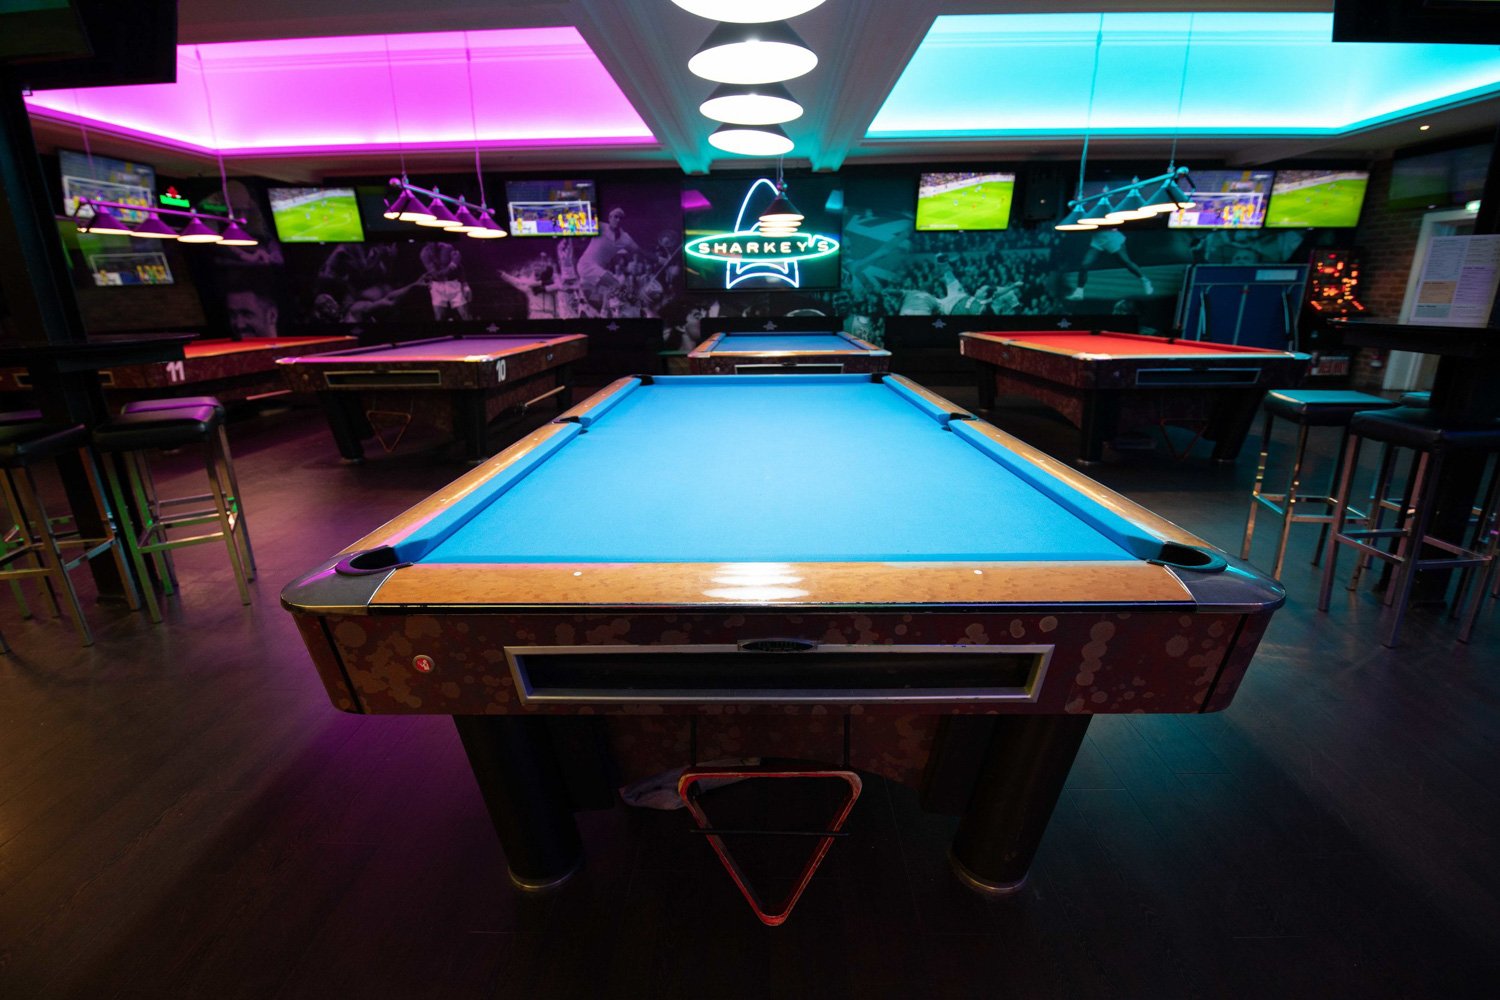 Sharkeys_Sports_Bar_Bournemouth_Live_Sports_Poole_Snooker_Table_Tennis_VIP_Rooms_Consoles-8.jpg